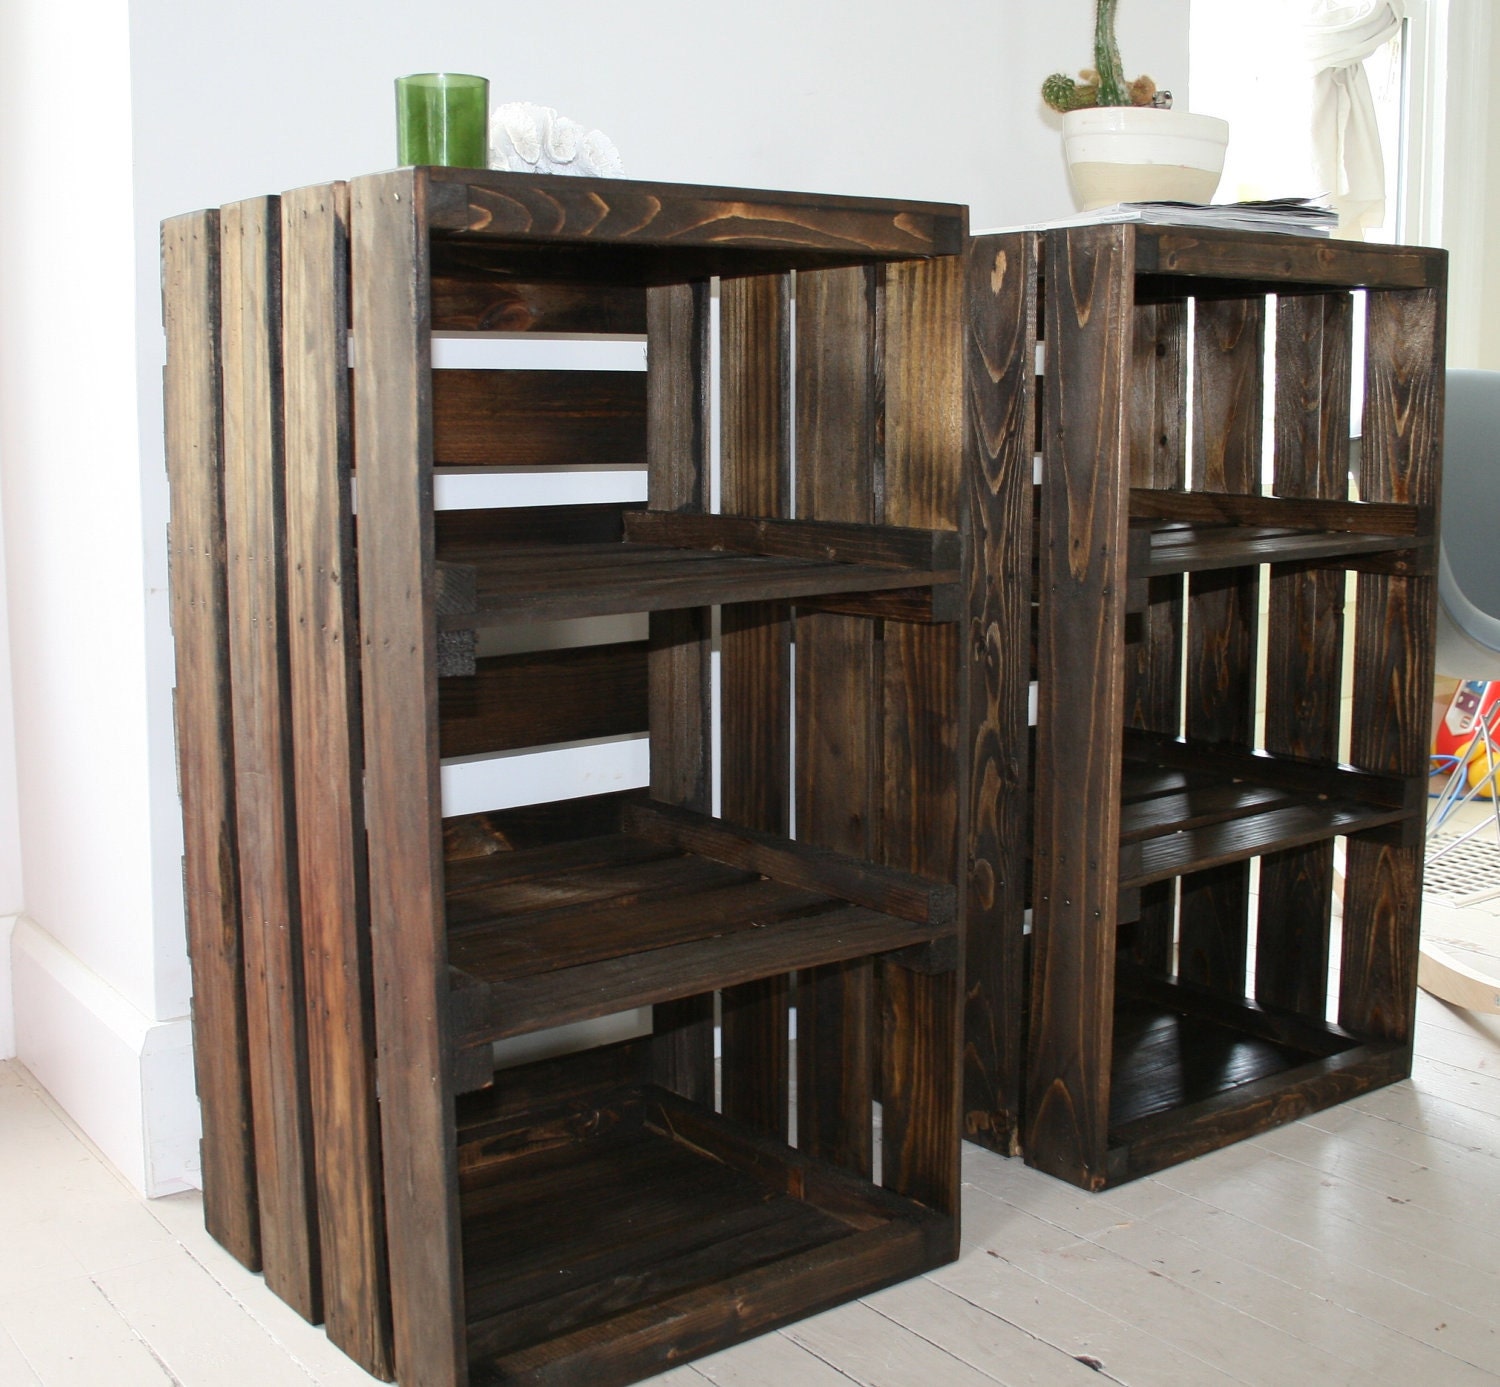  Crate Night Stand Furniture Table, Nightstands DIY From Crates